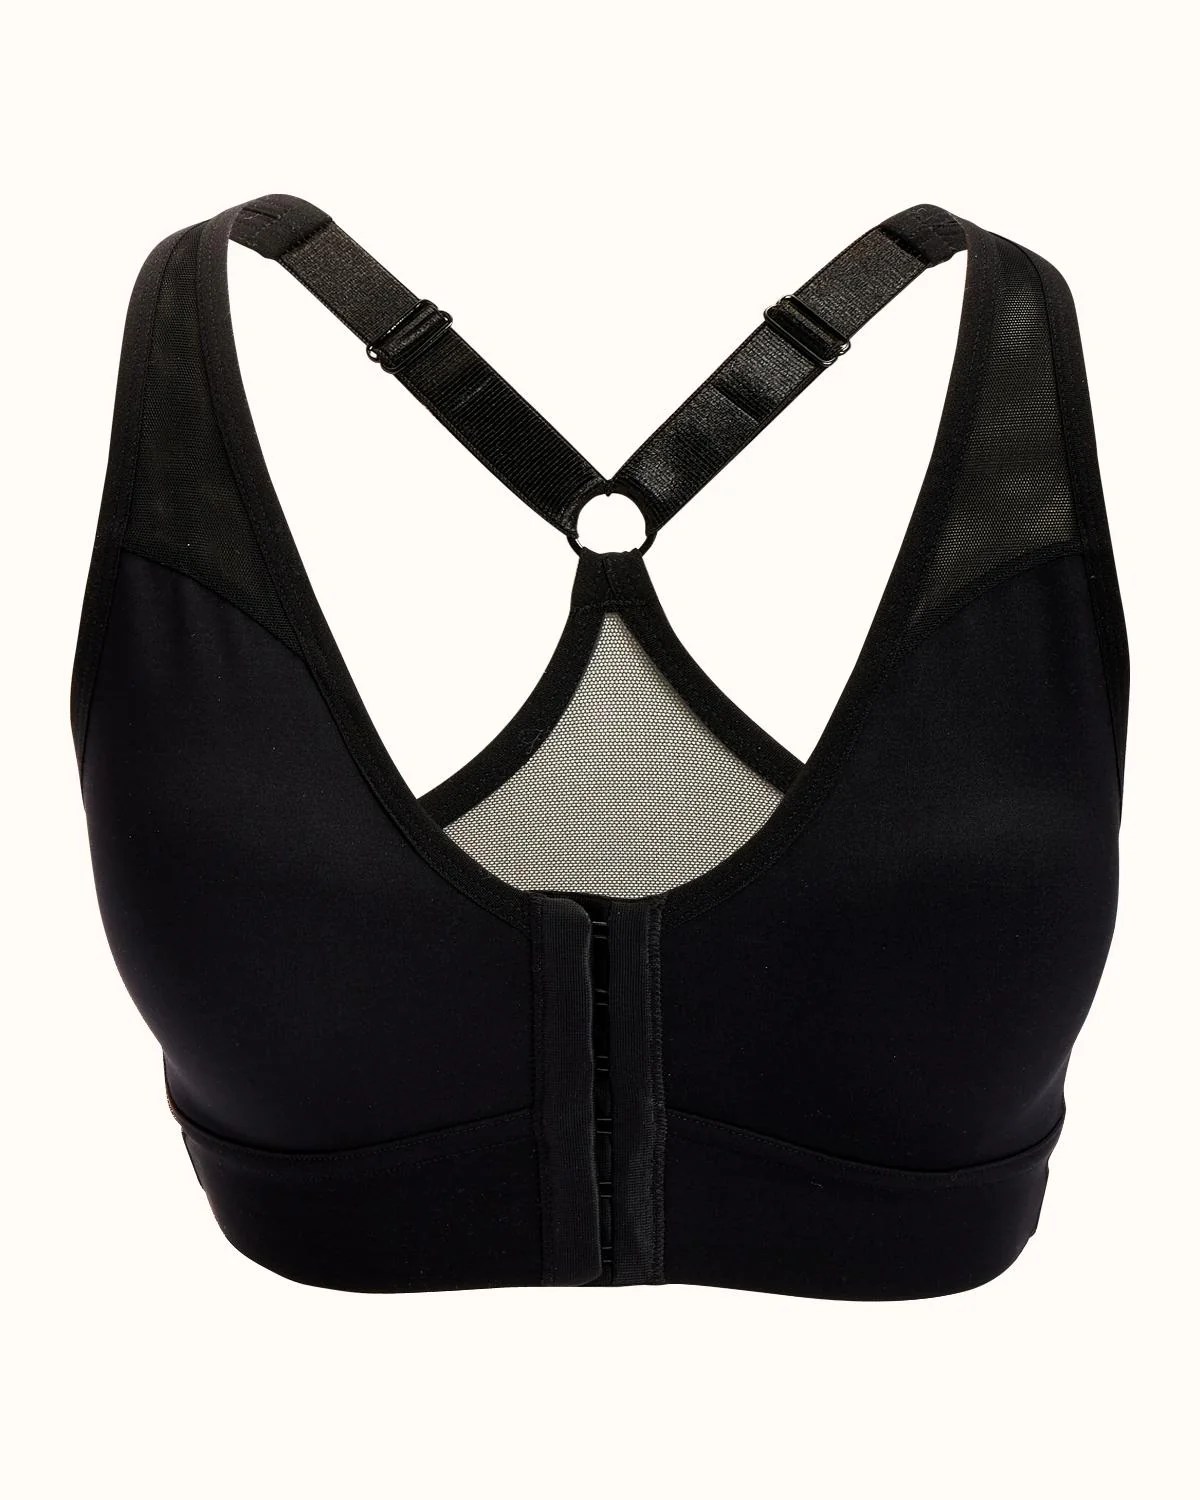 14 Front-Closure Bras for Seniors That Are Hassle-Free